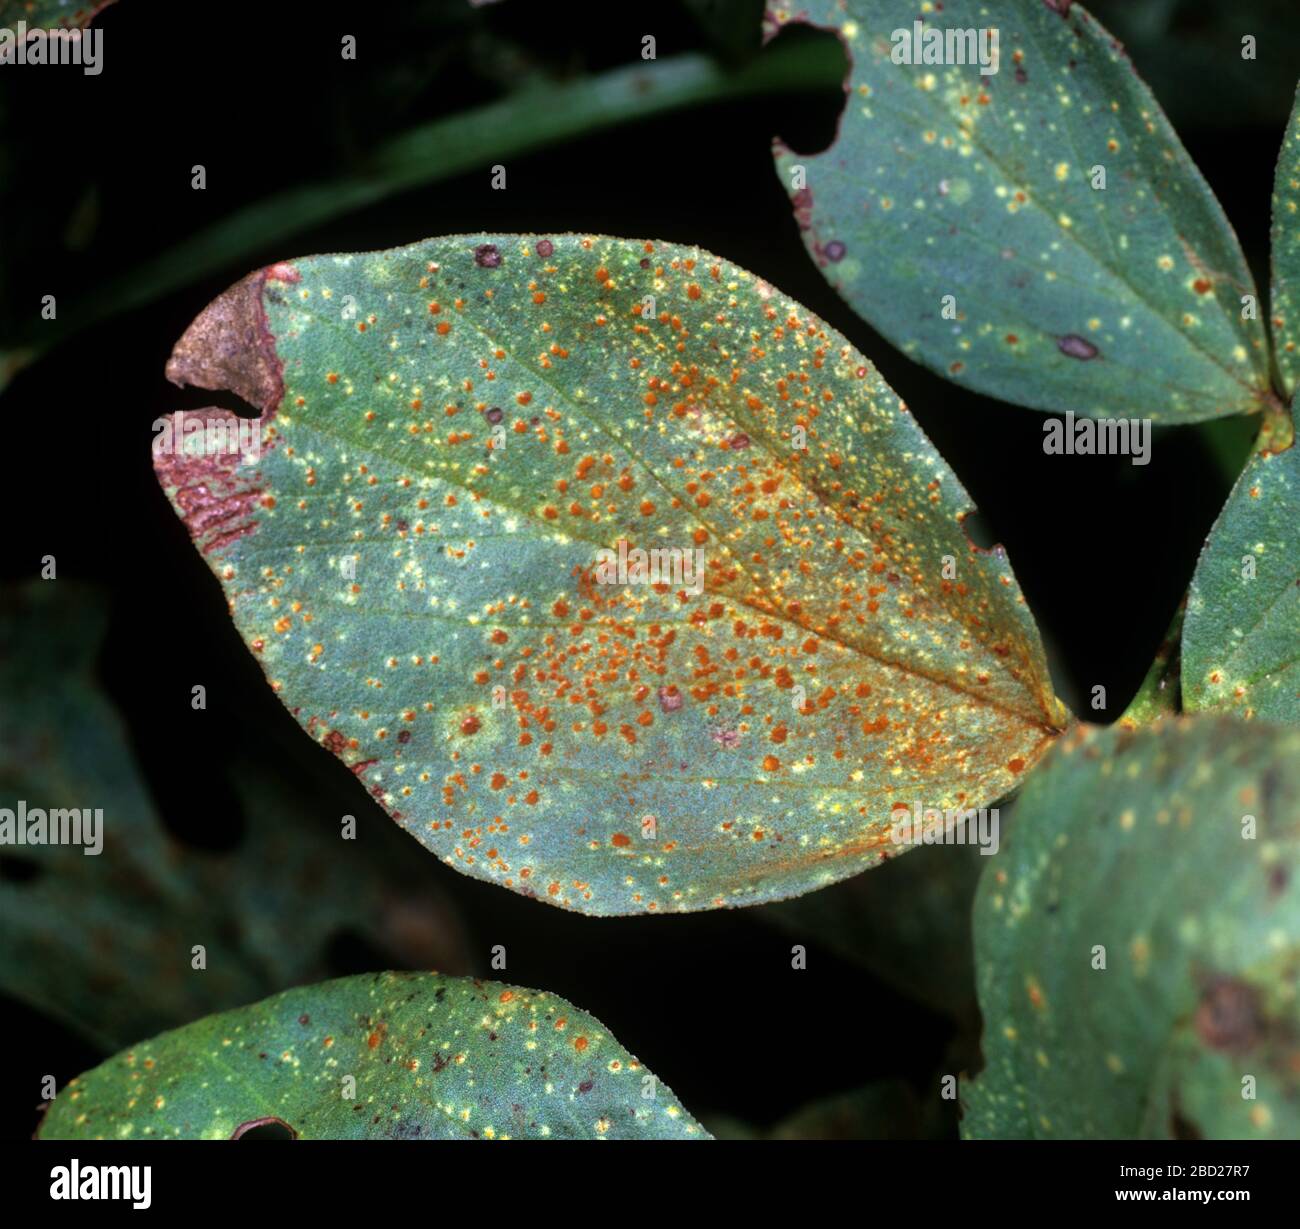 Severe late infection and pustules of broad bean or faba-bean rust (Uromyces viciae-fabae) on a bean leaf Stock Photo